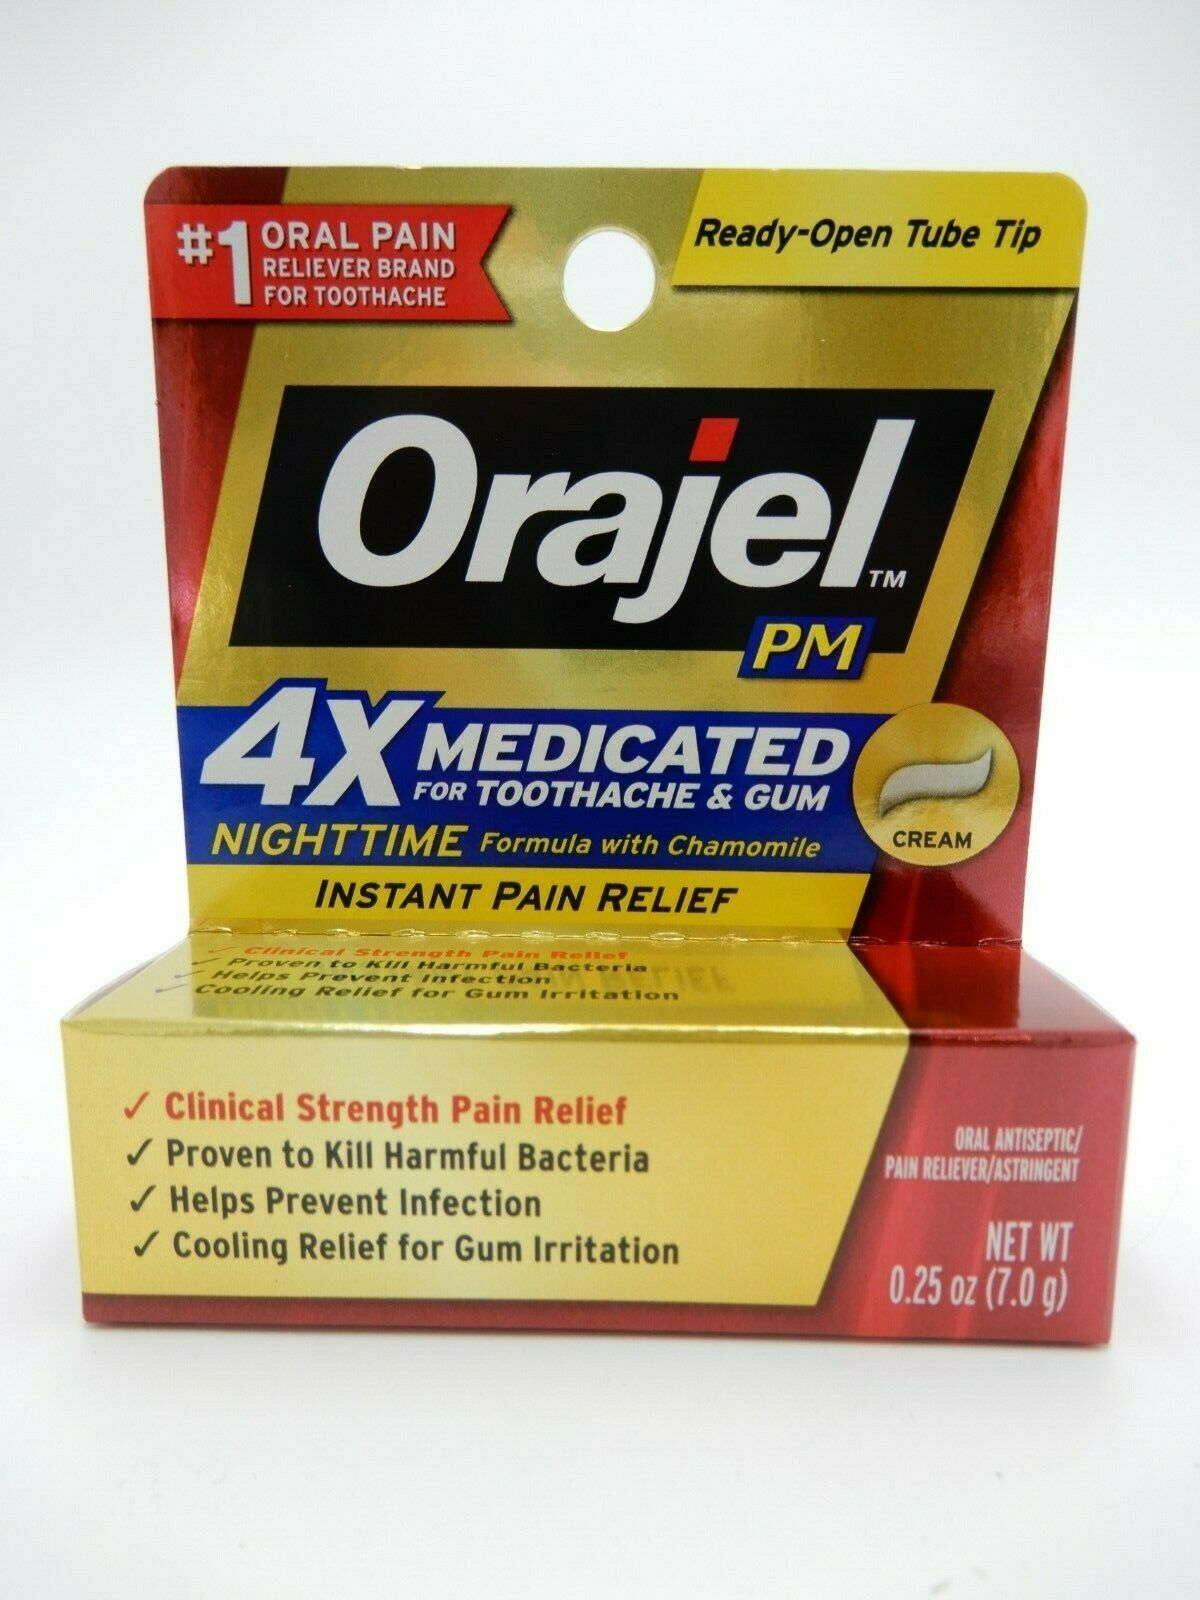 Orajel 4X Medicated PM For Toothache and Gum Cream - 0.25oz/24pk